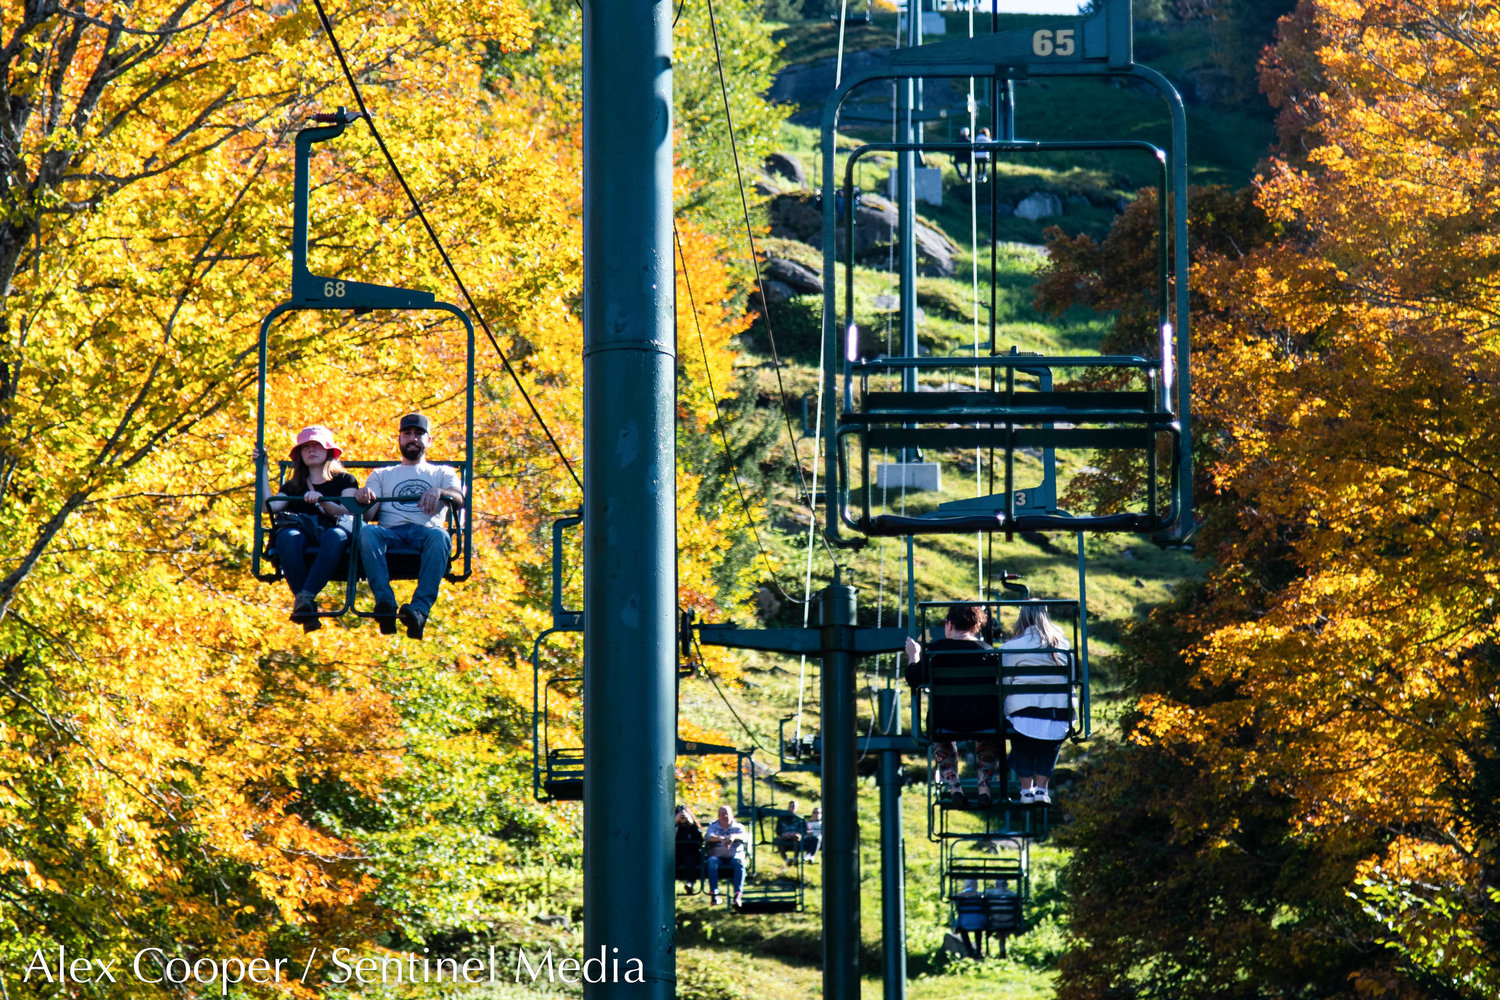 People ride the scenic chairlift ride at McCauley Mountain on Wednesday, Oct. 5 in Old Forge. Guests are able to view peak fall foliage from the lift and top of the mountain.